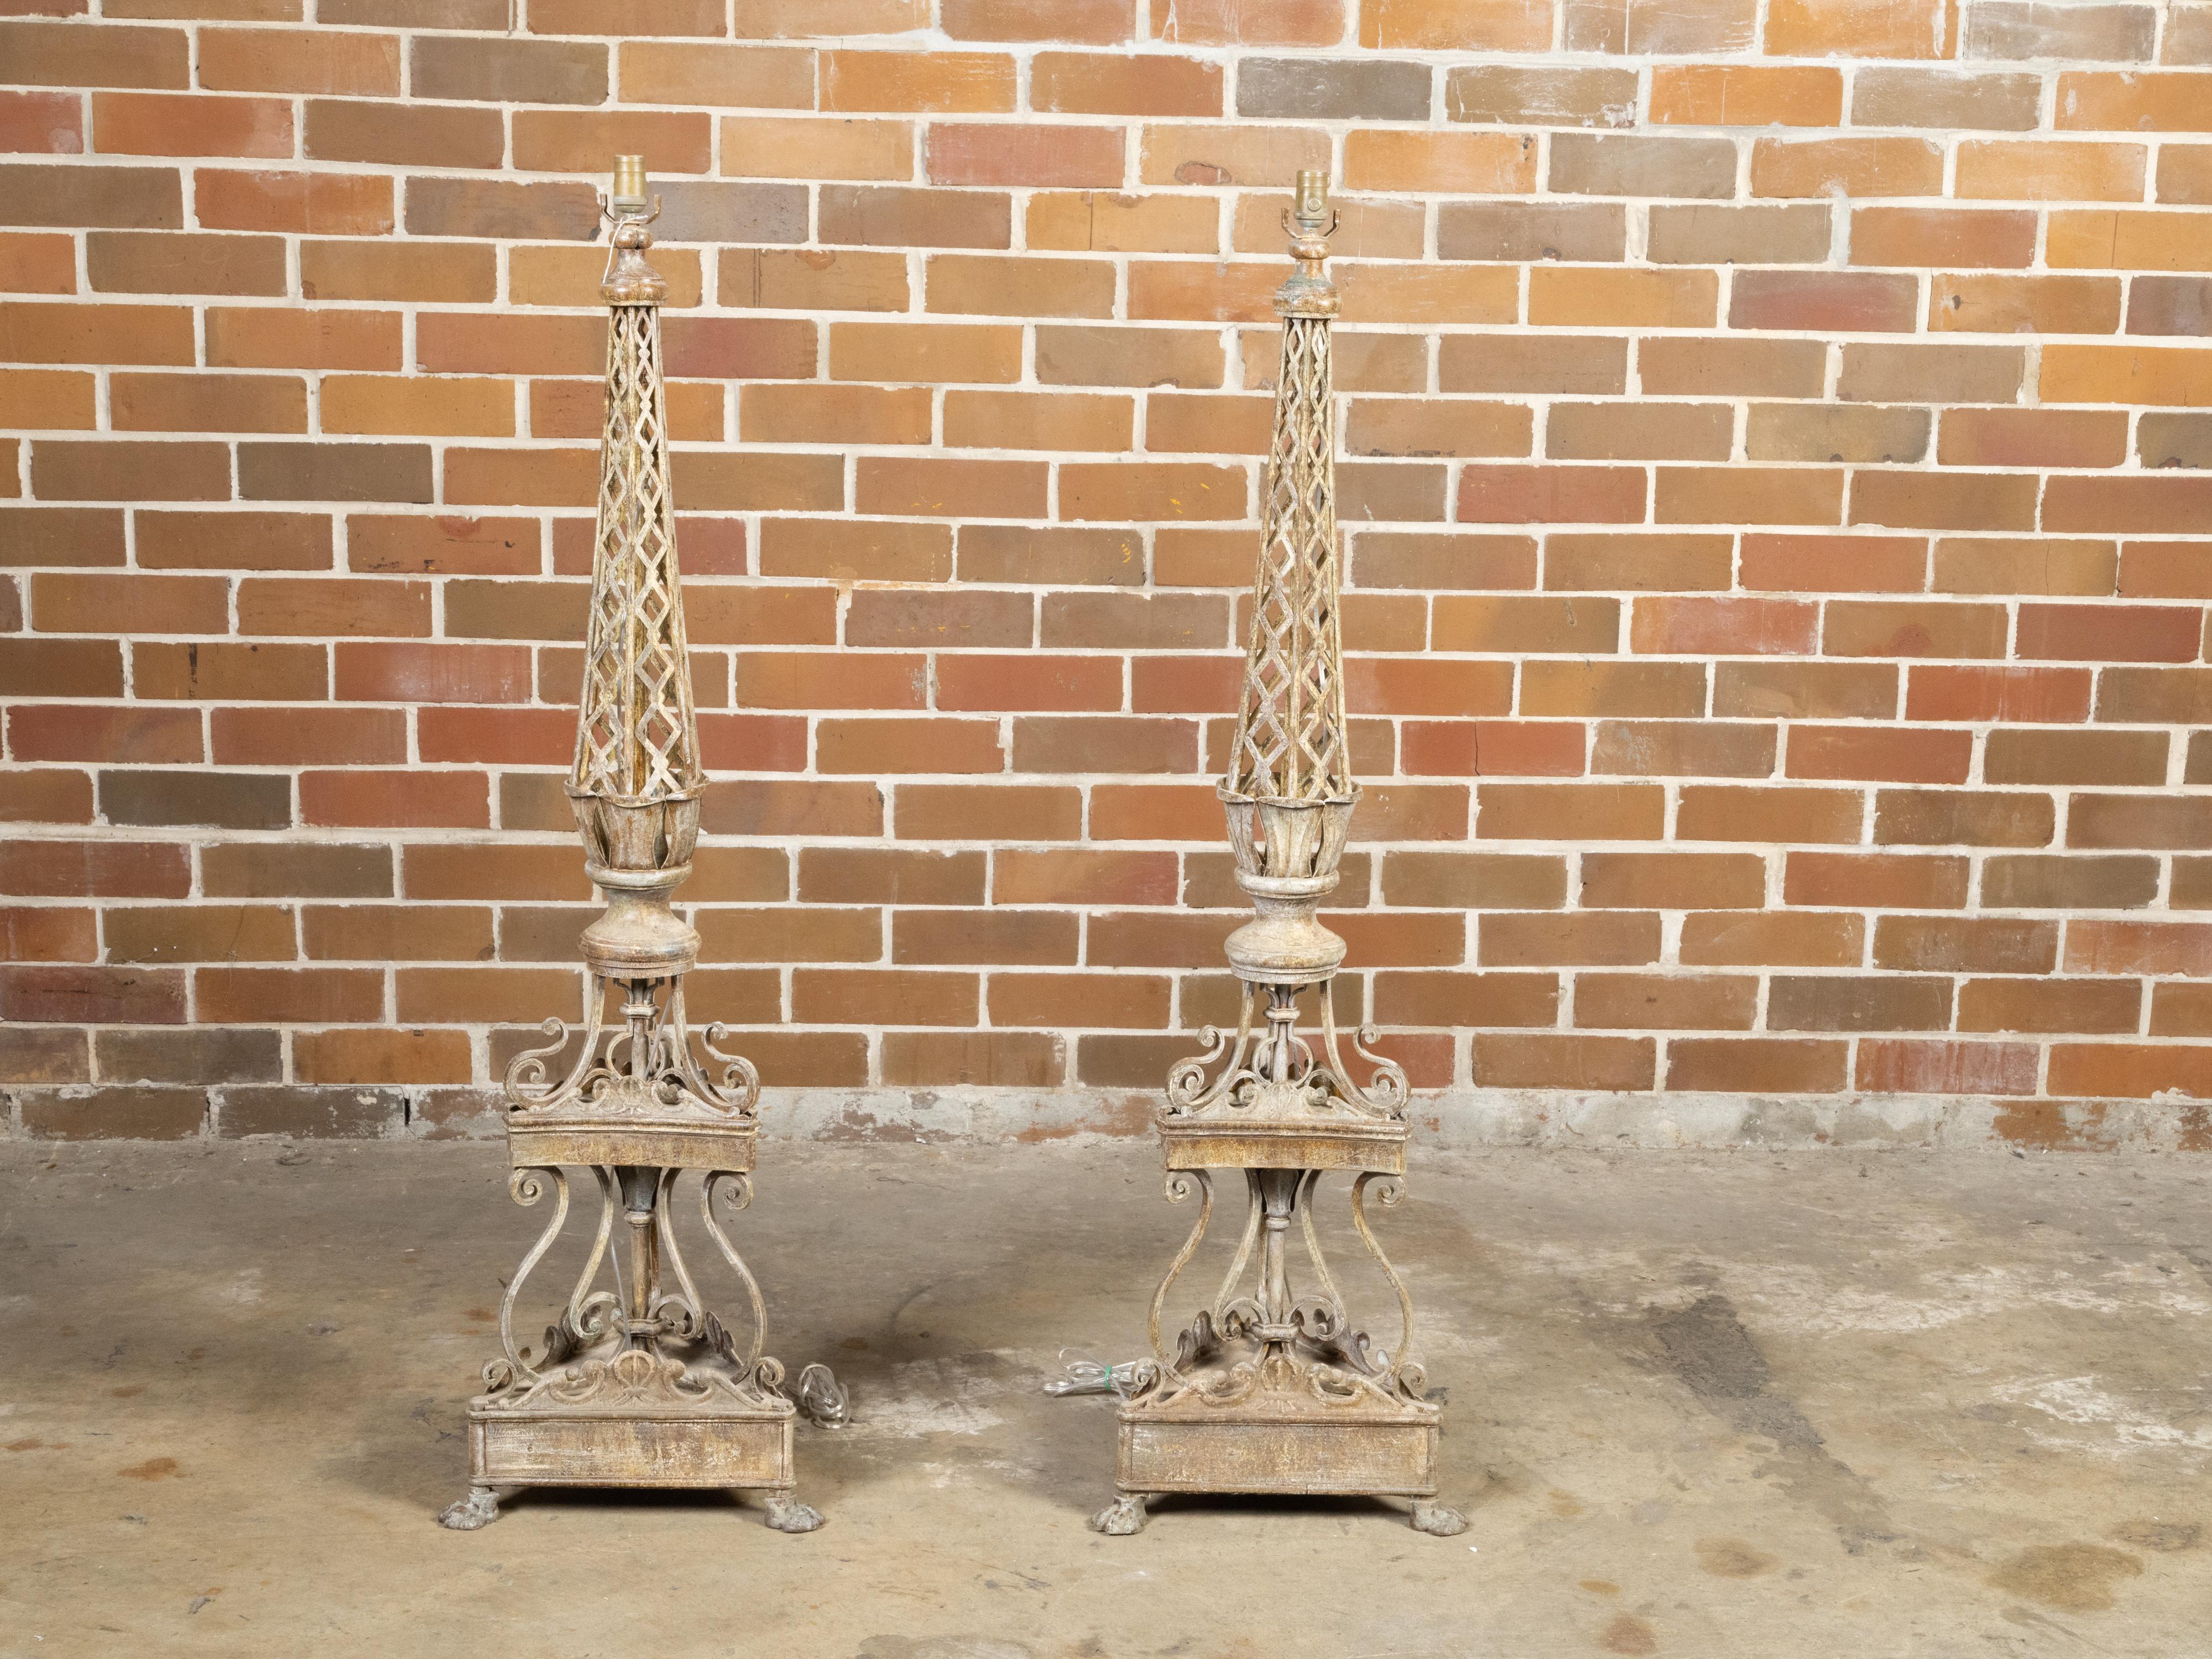 A pair of French painted iron floor lamps from the early 20th century with trellis motifs, tiered scrolling accents and lion paw feet. Created in France in the first quarter of the 20th century during the period called the Années Folles (the Roaring